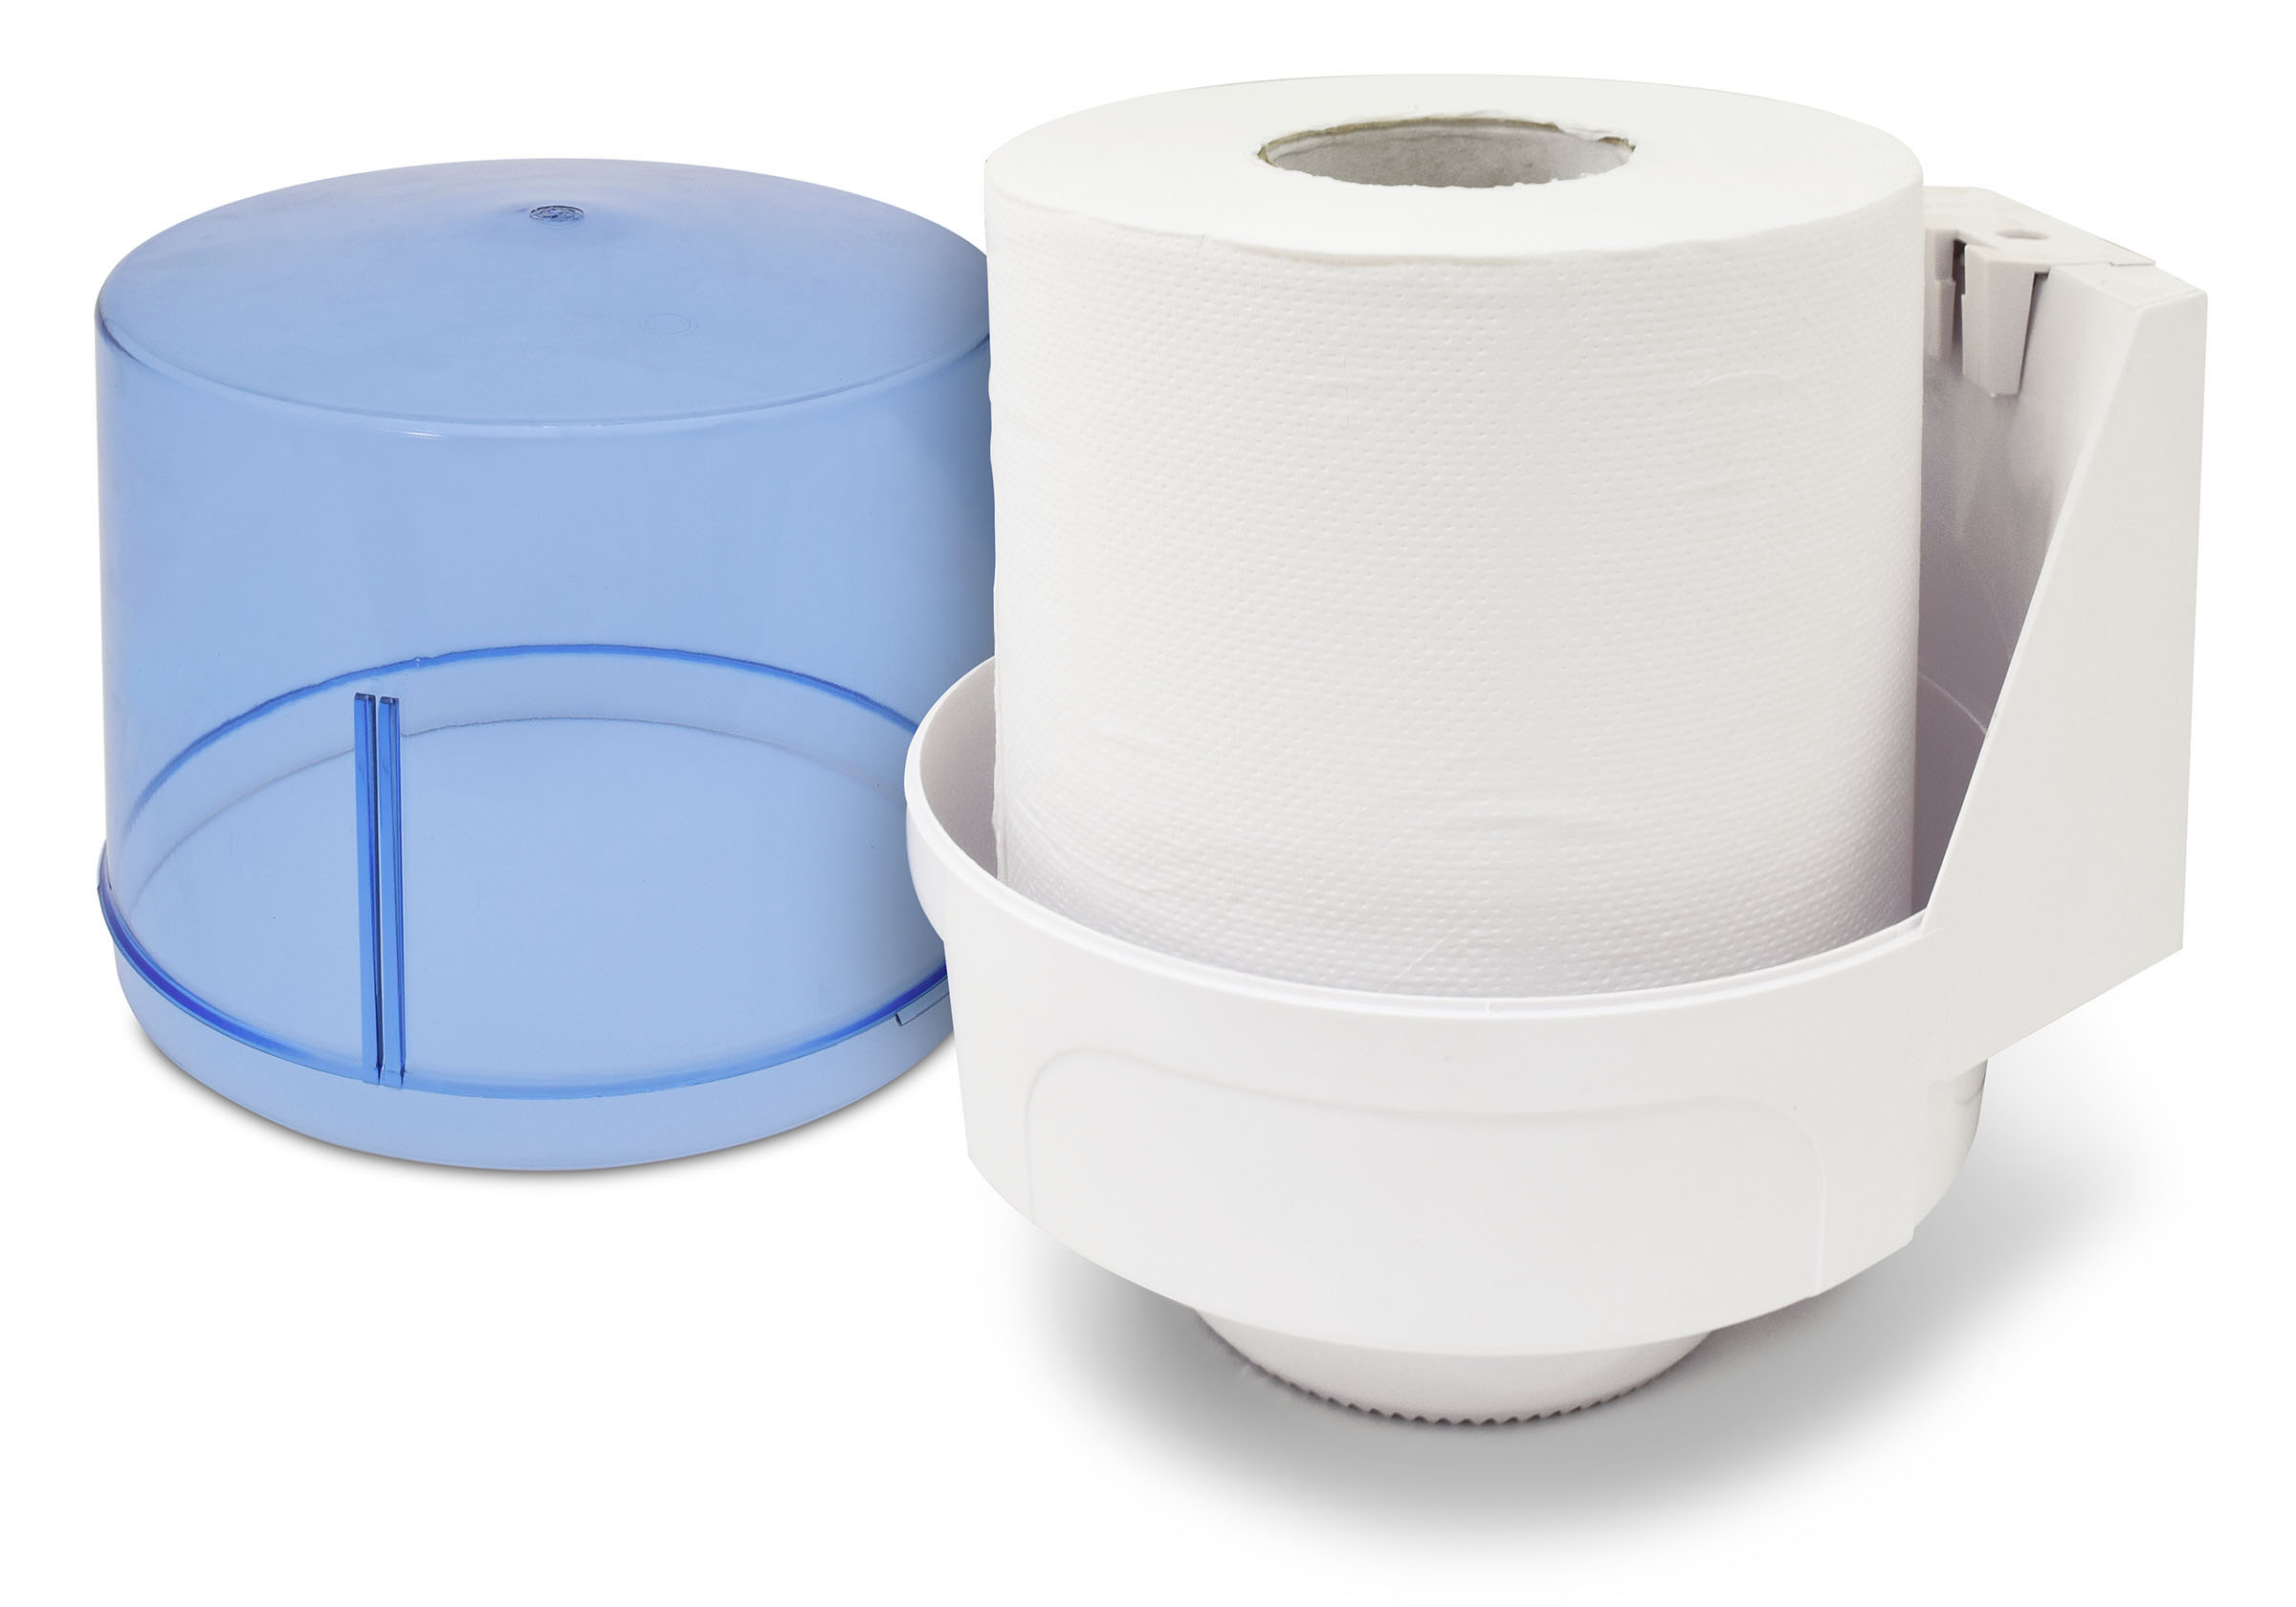 Alpha Hygiene Premium Virgin Material Center Pull Tissue Dispenser - Perfect for Home &amp; Commercial Use - Made in Malaysia  AH1300